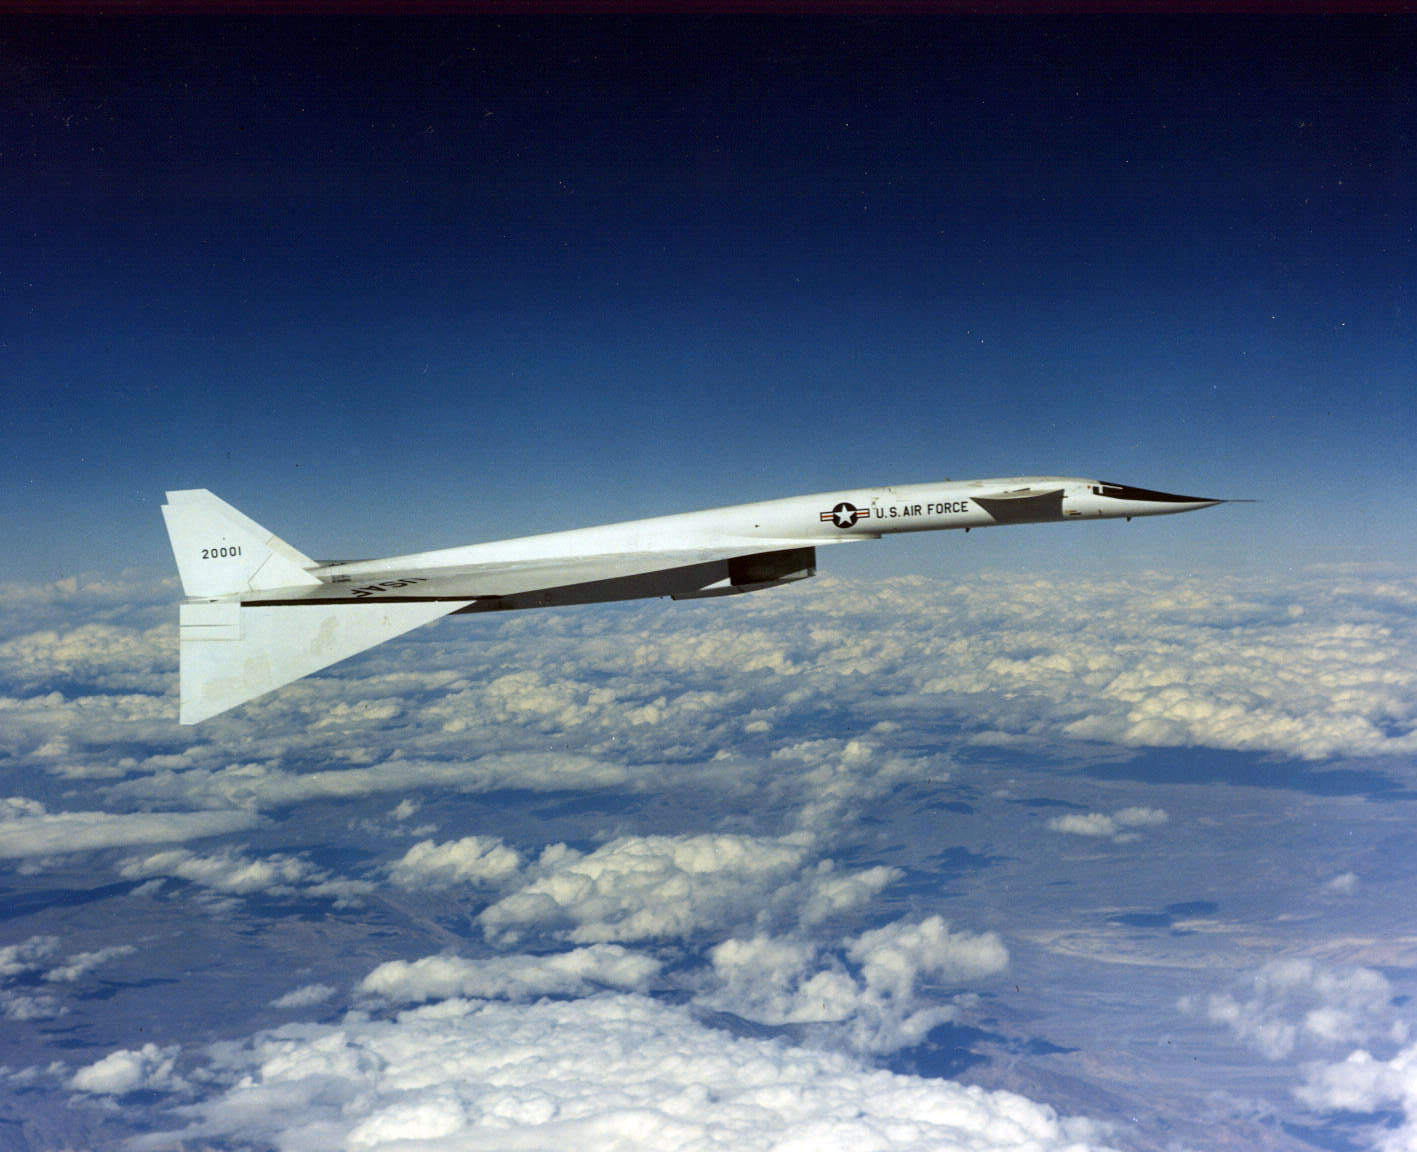 north_american_xb-70a_valkyrie_in_flight_with_wingtips_in_65_percent_full_drooped_position_061122-f-1234p-021.jpg